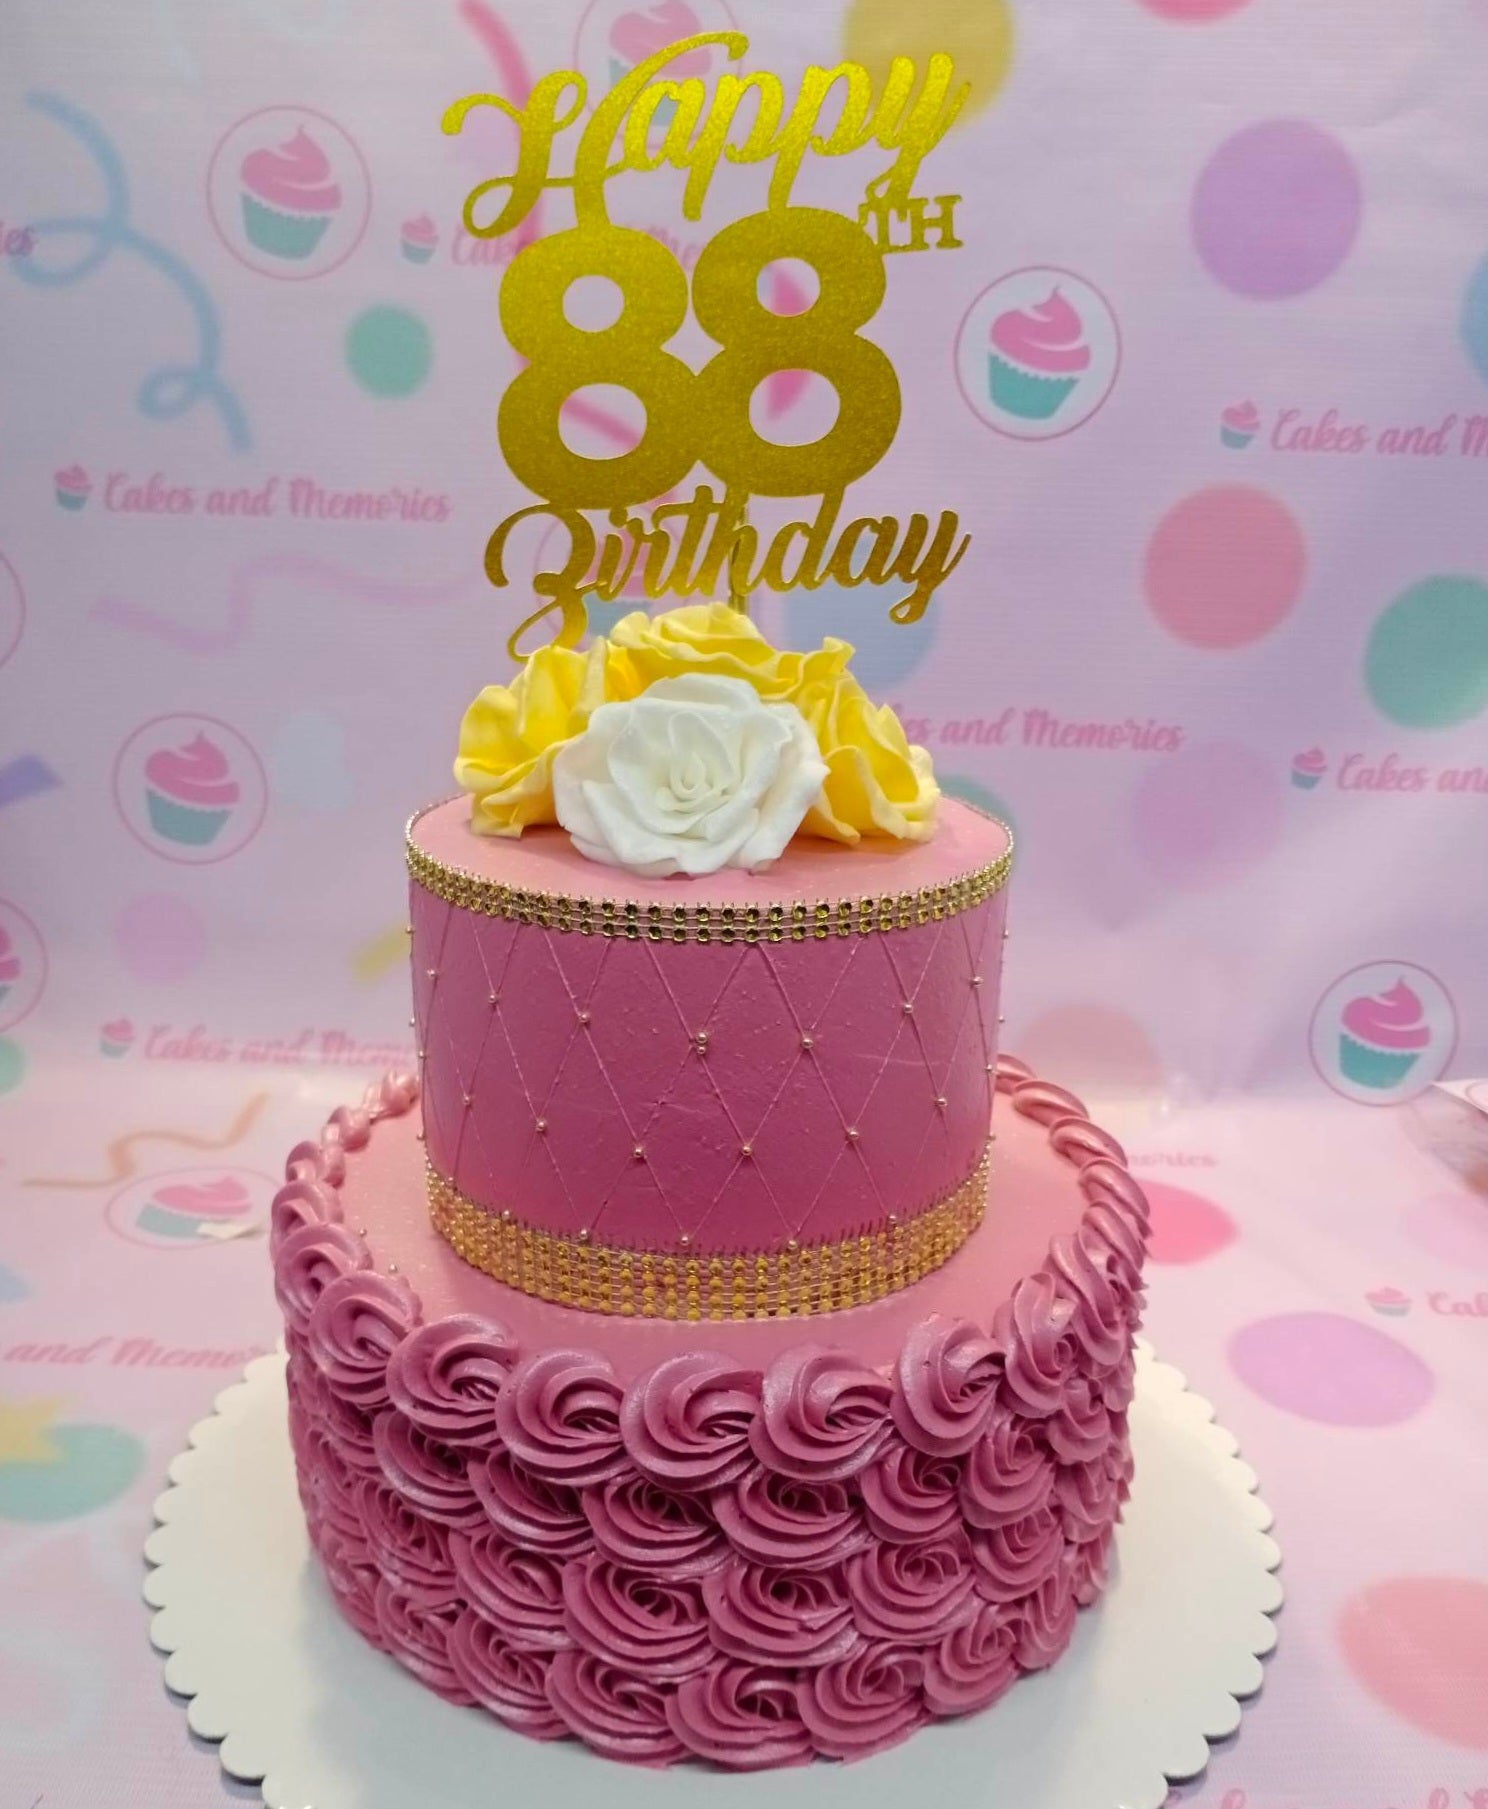 This custom decorated cake is perfect for any special occasion. It features a fifty cake with maroon and gold rosettes and is perfect for a birthday celebration for a grandfather, grandmother, lola, or lolo turning fifty or sixty. The premium quality and intricate design of this cake makes it a great centerpiece to a special event.